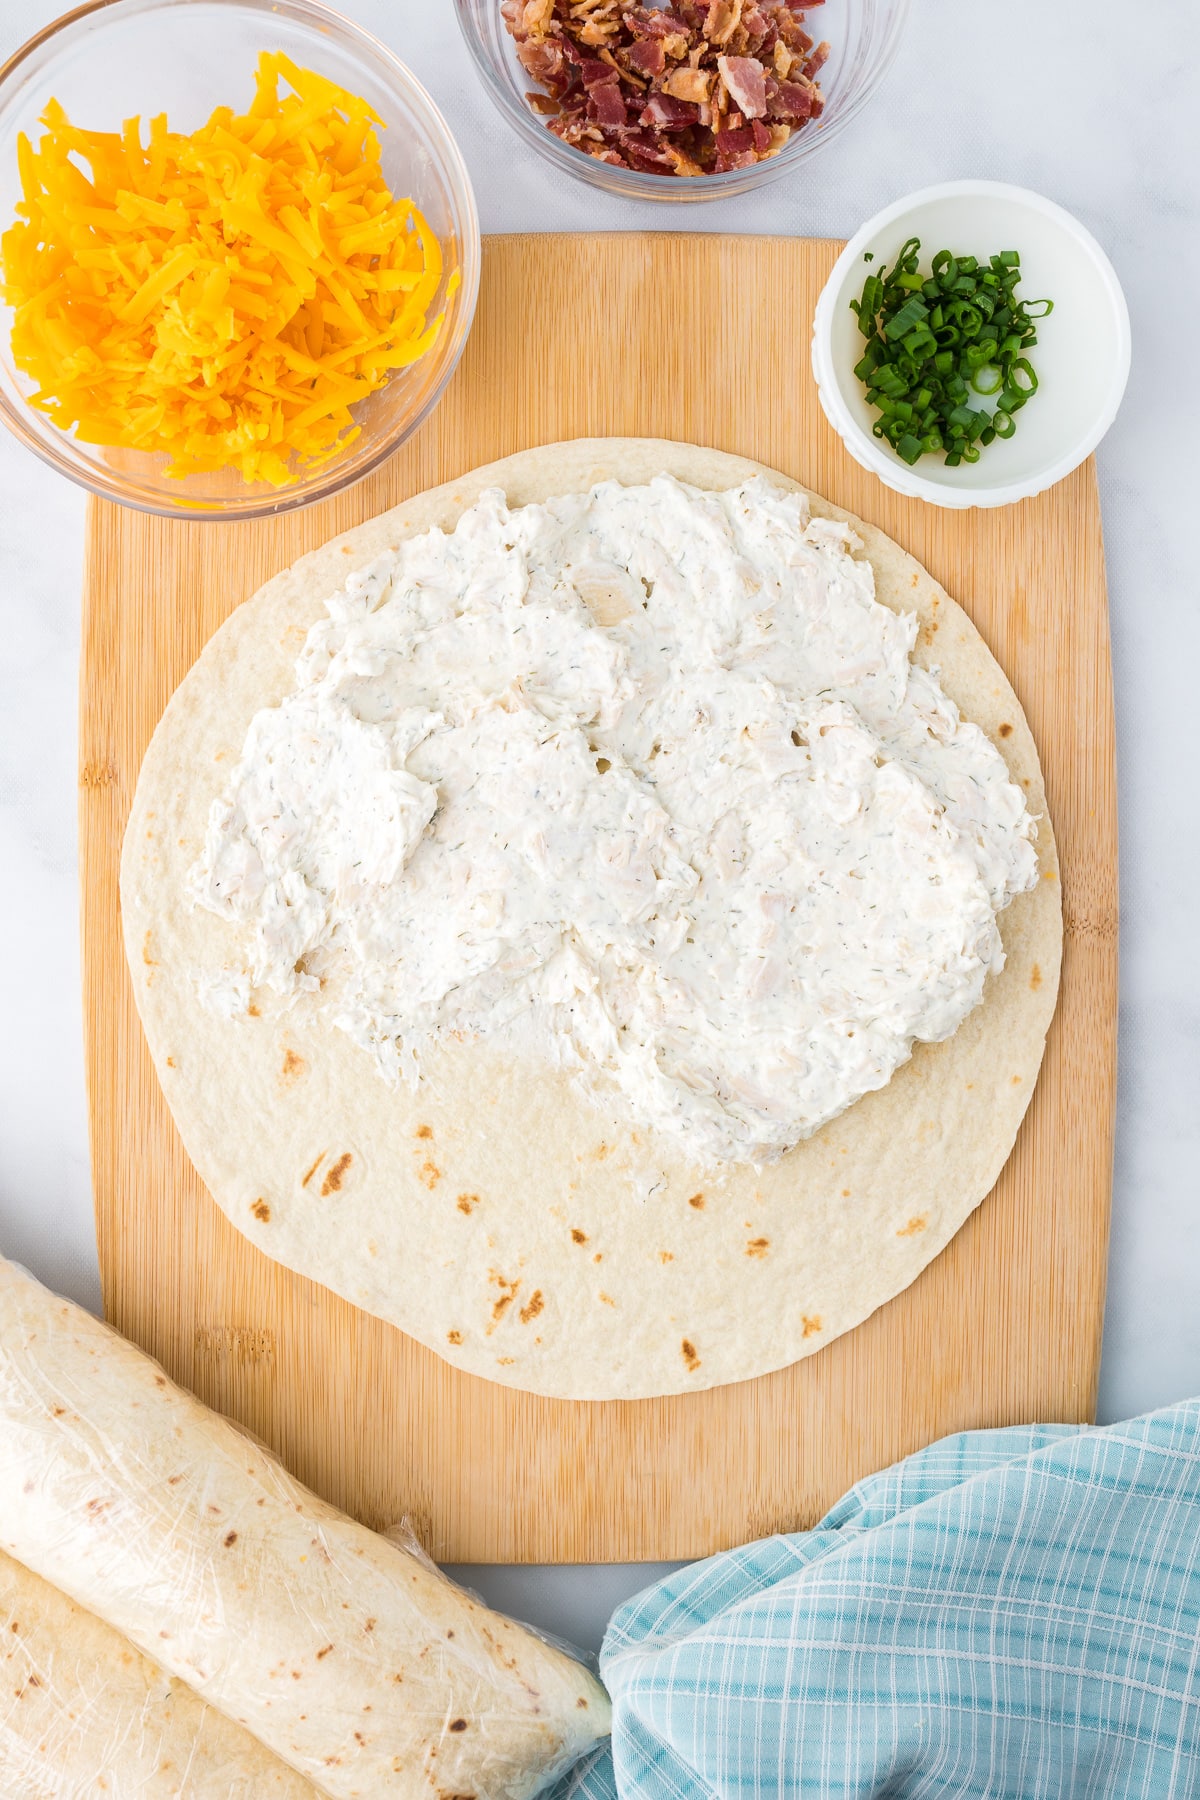 Spreading the cream cheese mixture on a large tortilla from overhead.